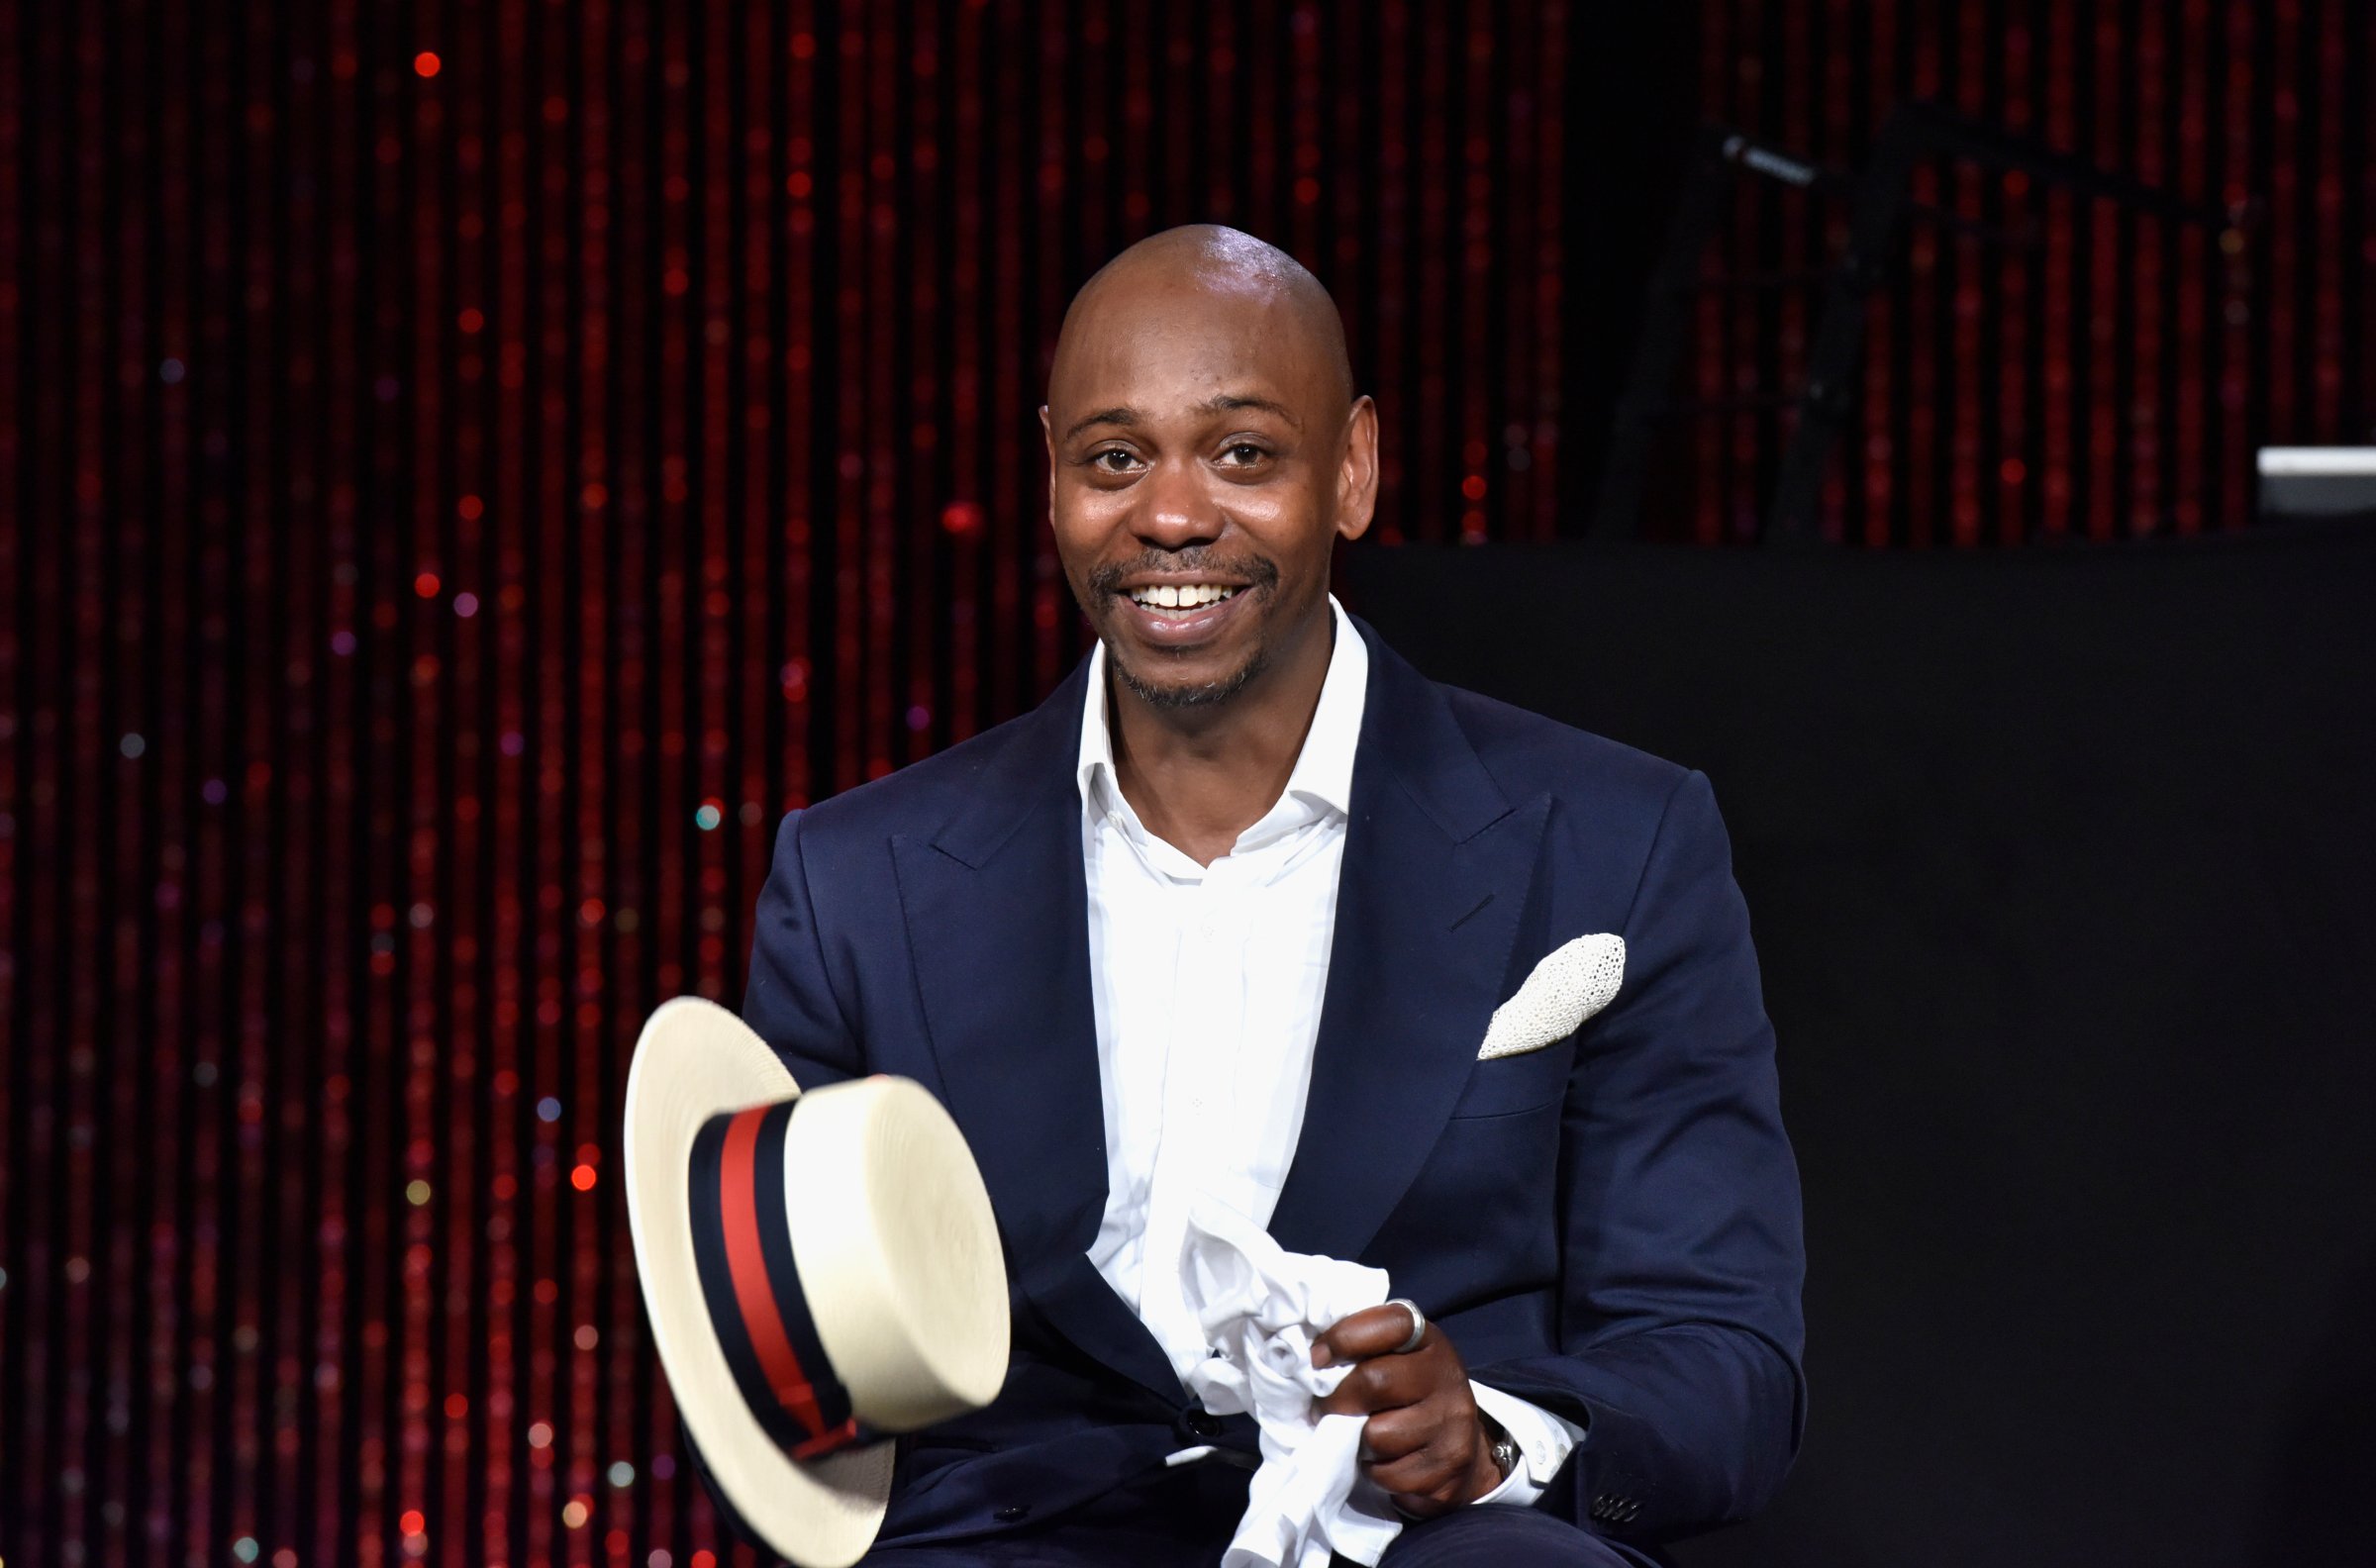 Dave Chappelle speaks on stage as RUSH Philanthropic Arts Foundation Celebrates its 20th Anniversary at Fairview Farms on July 18, 2015 in Water Mill, New York.